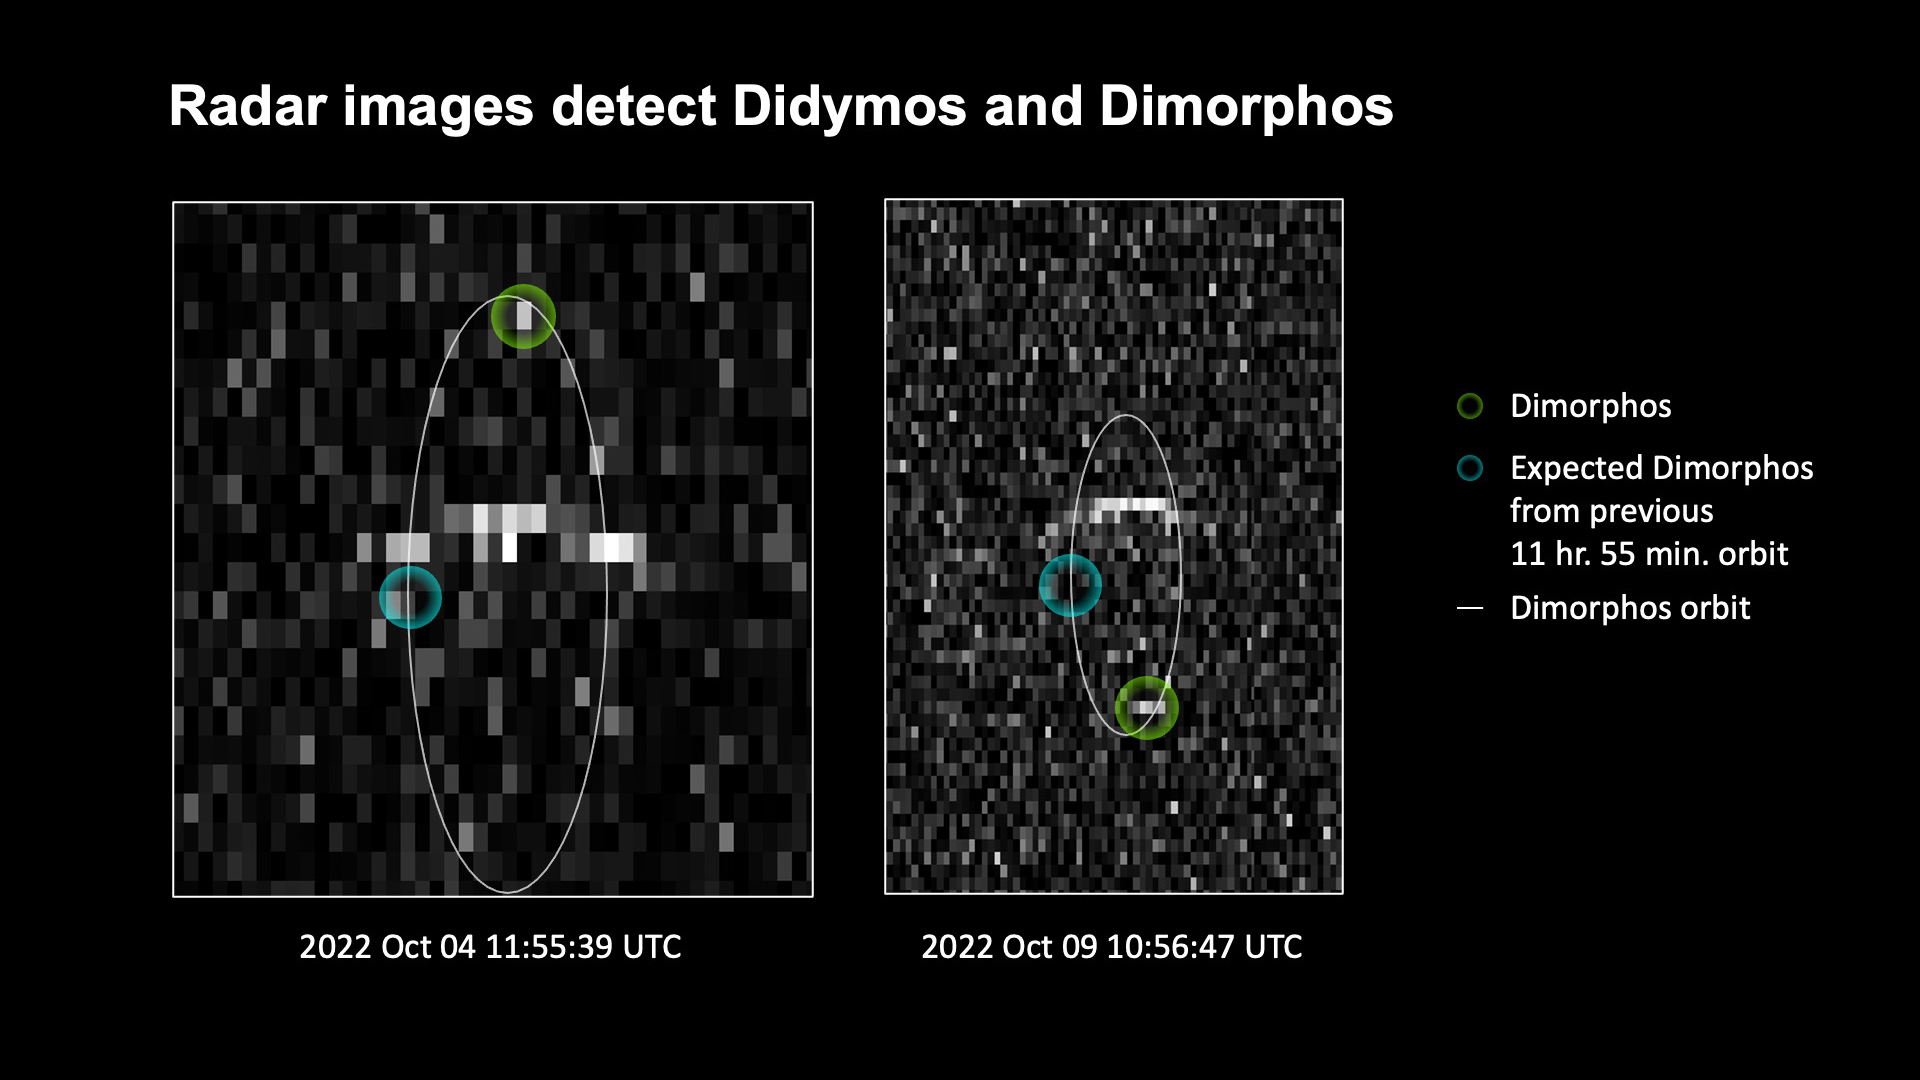 The green circle shows the location of the Dimorphos asteroid, which orbits the larger asteroid, Didymos, seen here as the bright line across the middle of the images. 